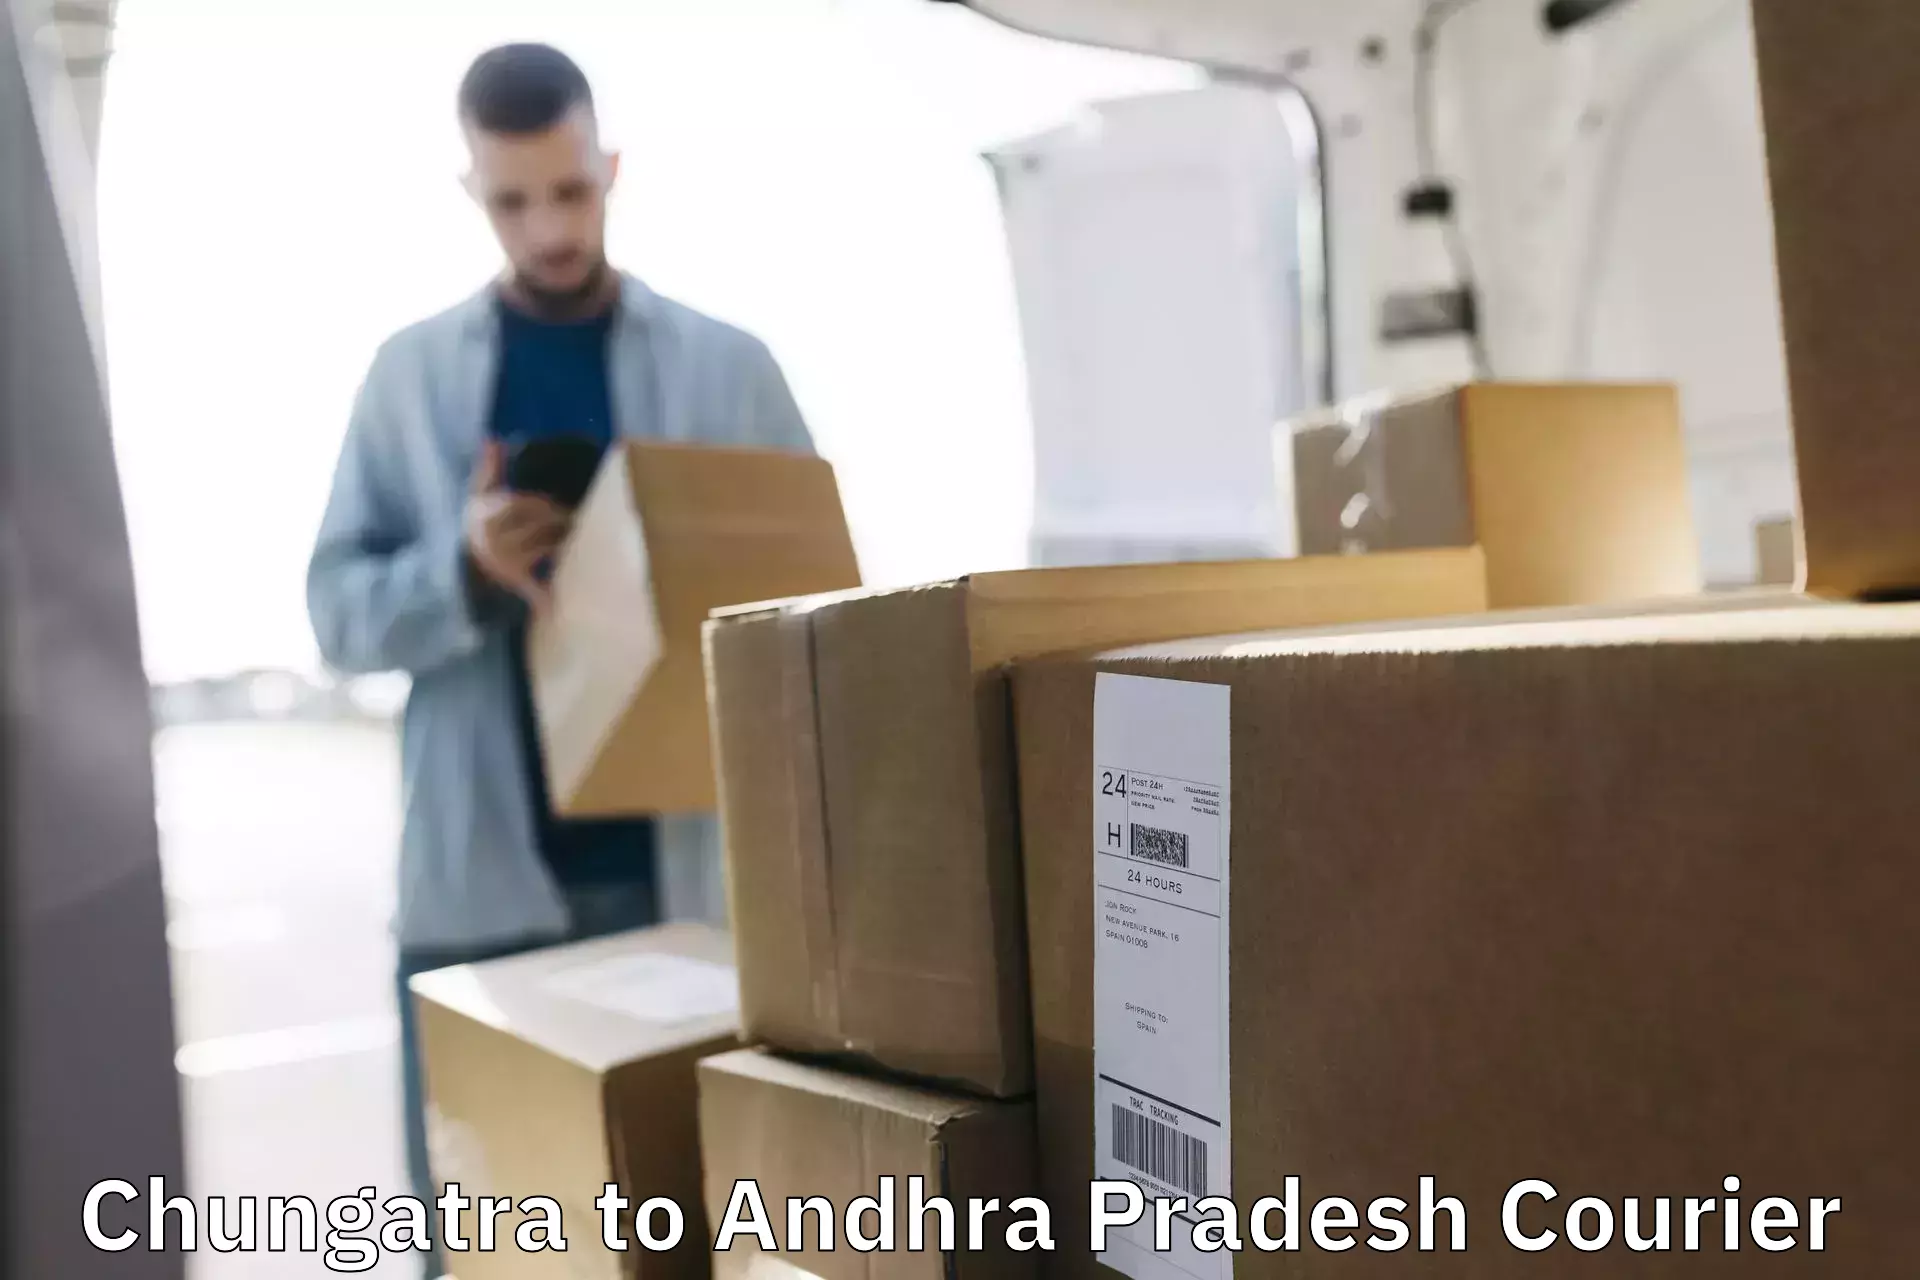 Courier service booking Chungatra to Visakhapatnam Port